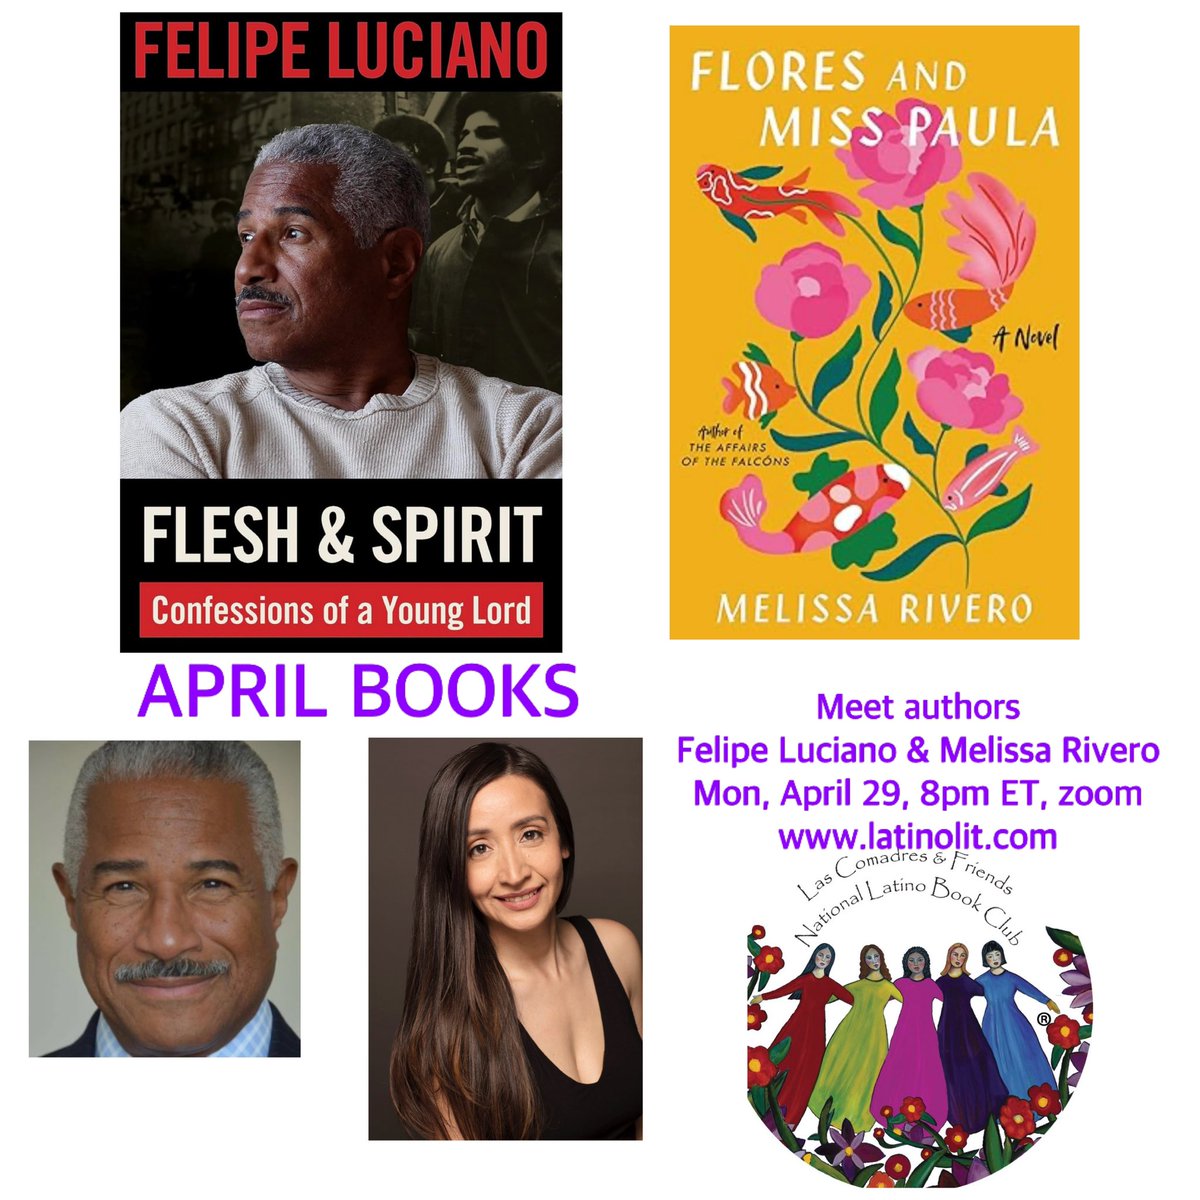 Meet authors @FelipeJLuciano & @melissa_rivero on Mon, Apr 29, as we talk about overcoming all odds, and mother-daughter dynamics.  Register today and you may win free book: 
latinolit.com/join-teleconfe… #ReadLatinoLit